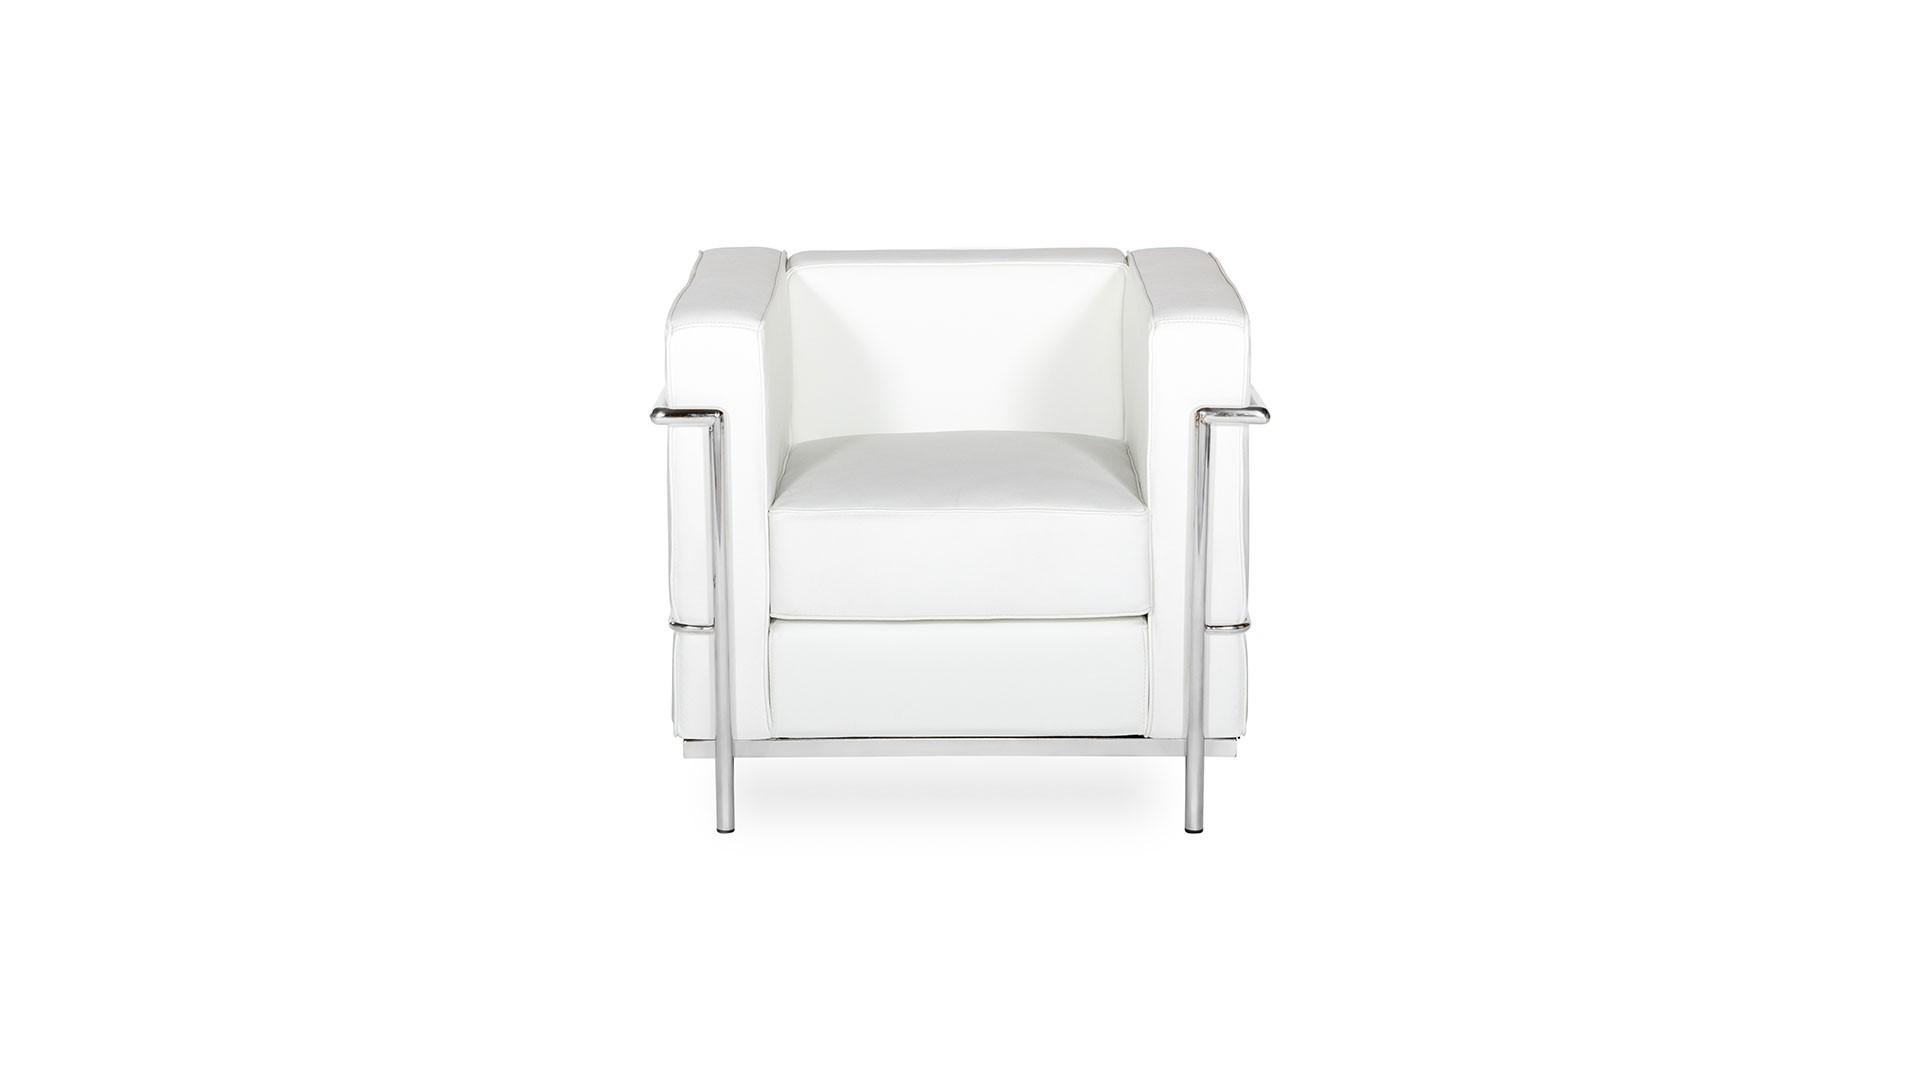 At Home USA Nube Oversized Chair